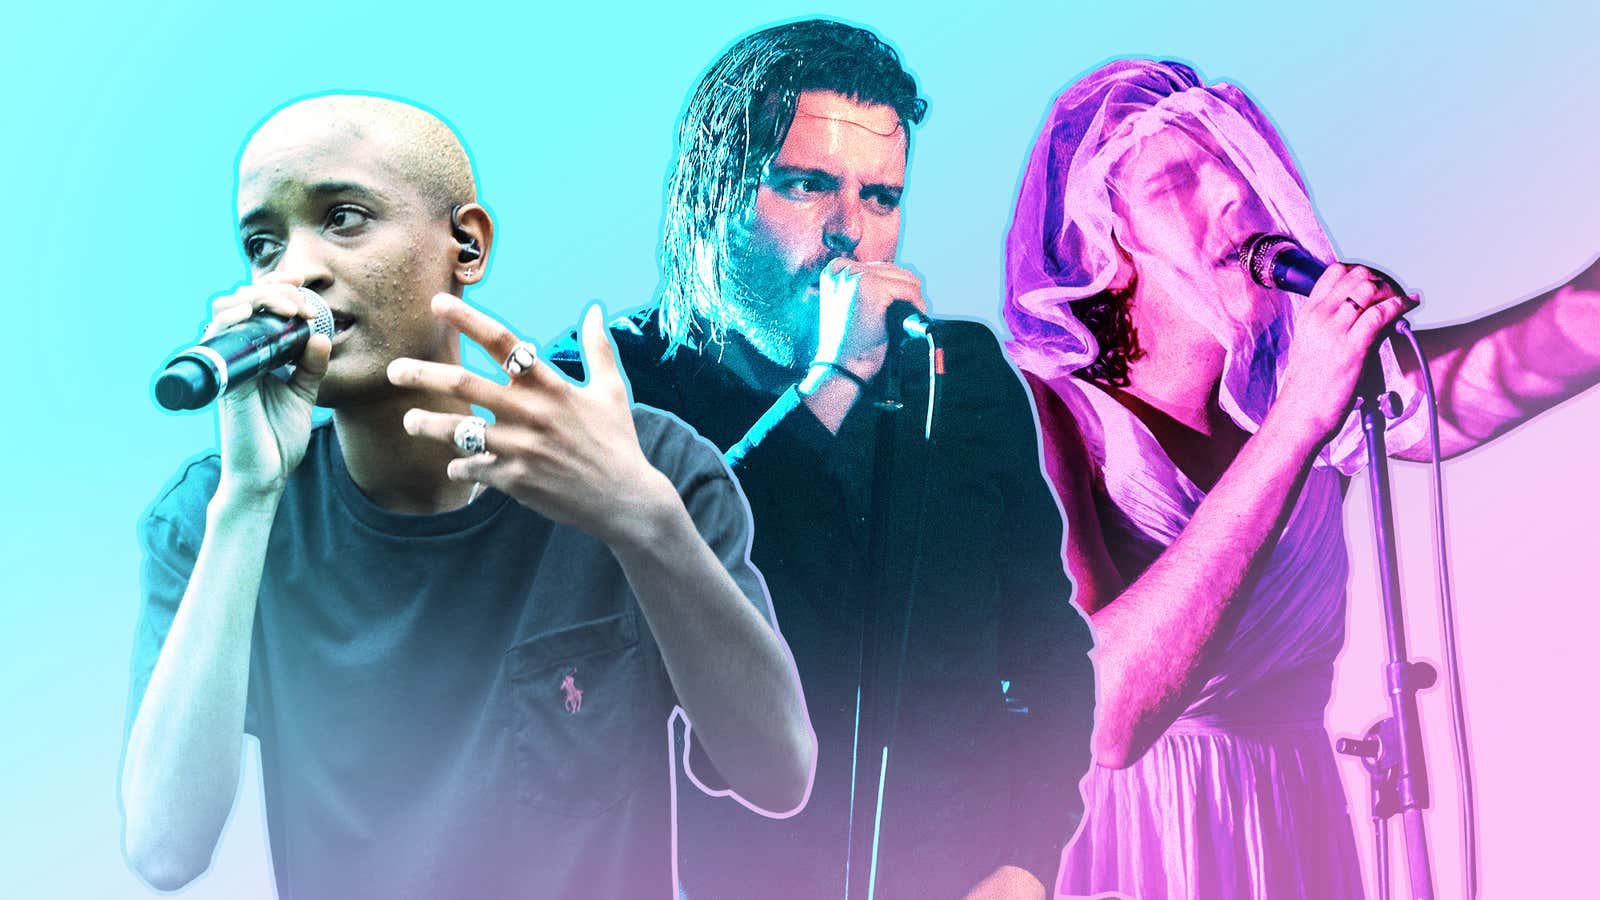 Syd of The Internet (Photo: Paul R. Giunta/Getty Images), George Clarke of Deafheaven (Photo: David A. Smith/Getty Images), and Angus Andrew of Liars (Photo: Andrew Benge/Redferns via Getty Images). Graphic: Natalie Peeples